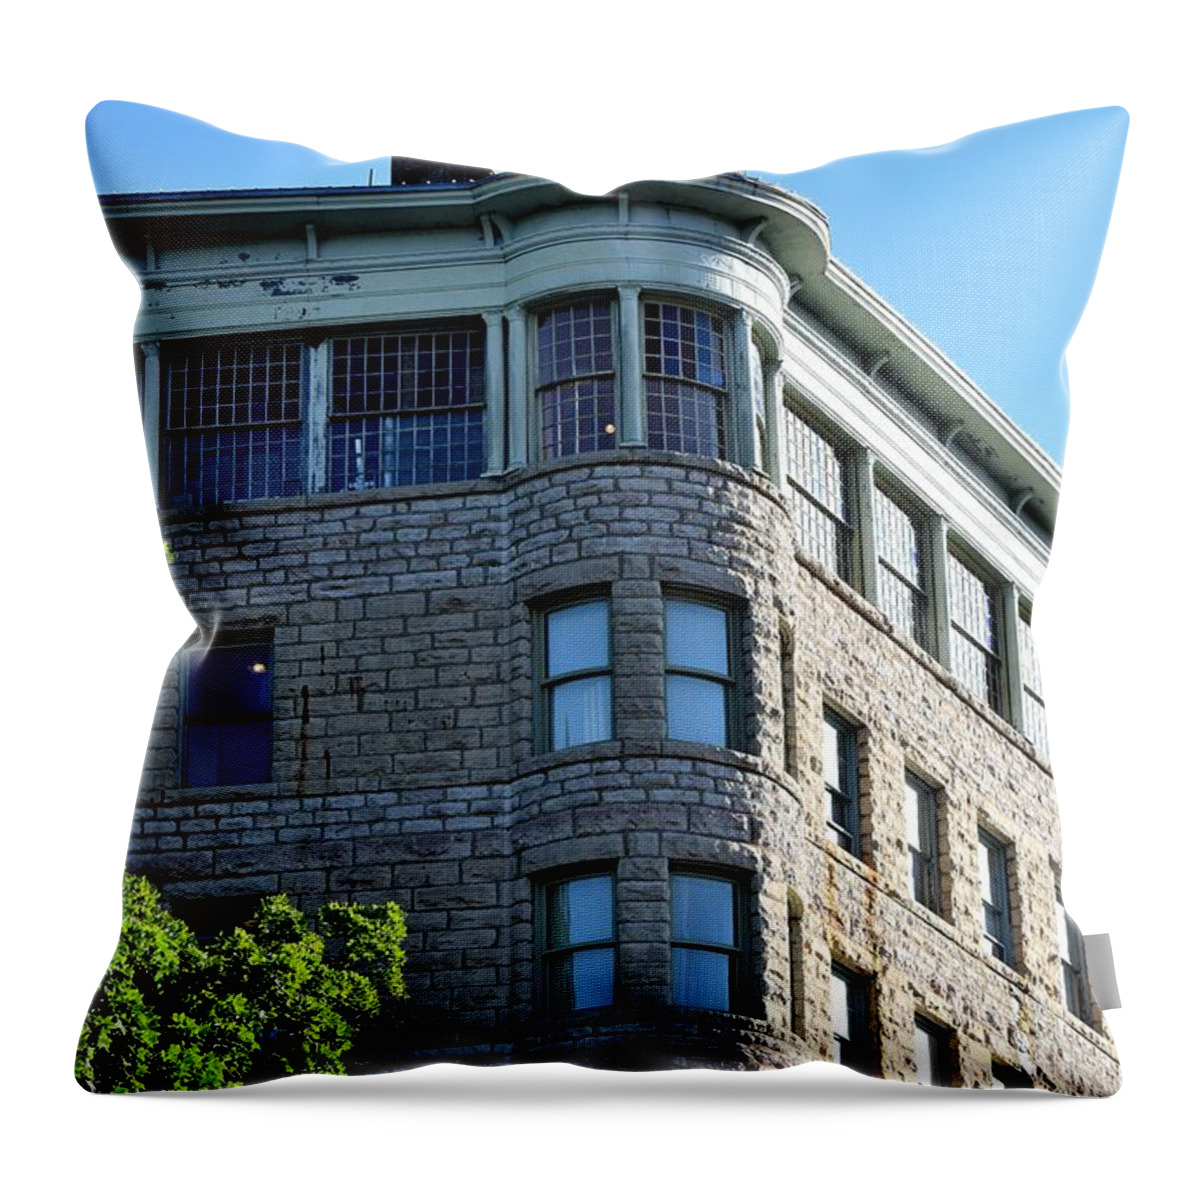 Basin Park Hotel Throw Pillow featuring the photograph Todays Art 1251 by Lawrence Hess